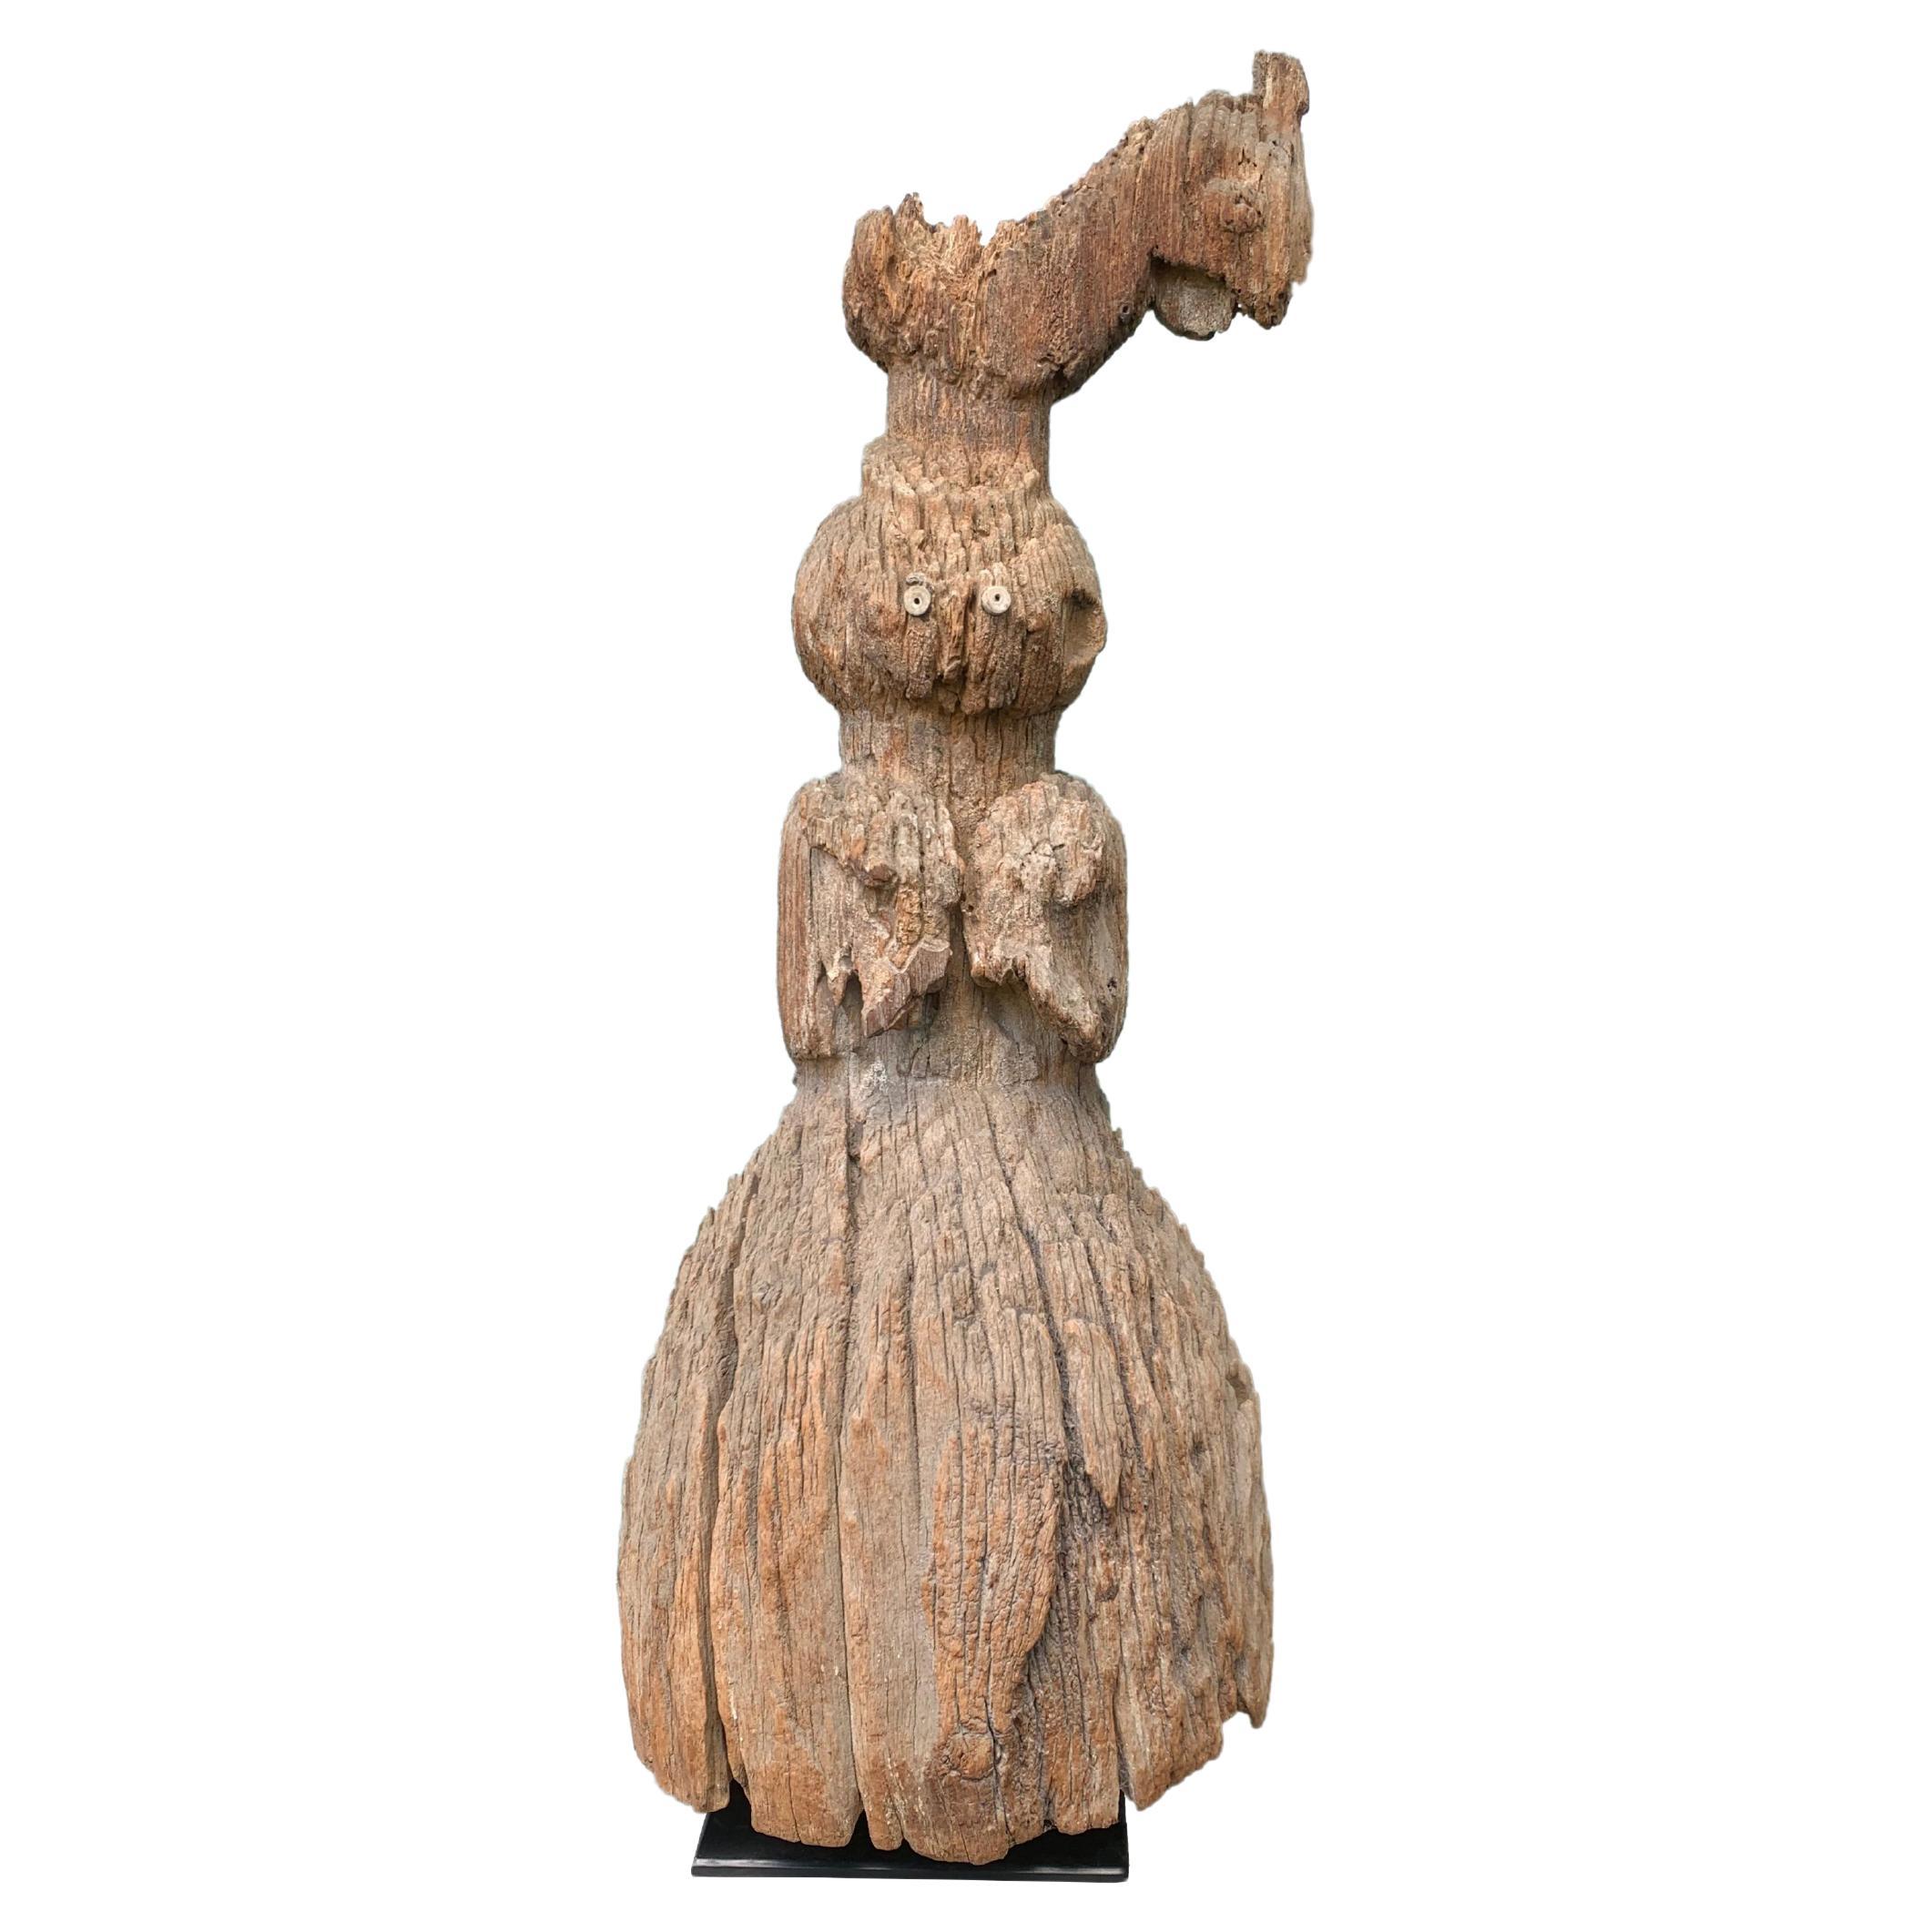 Wood Guardian Figure on a Stand with Shell Inlaid Eyes Timor, Indonesia, c. 1900